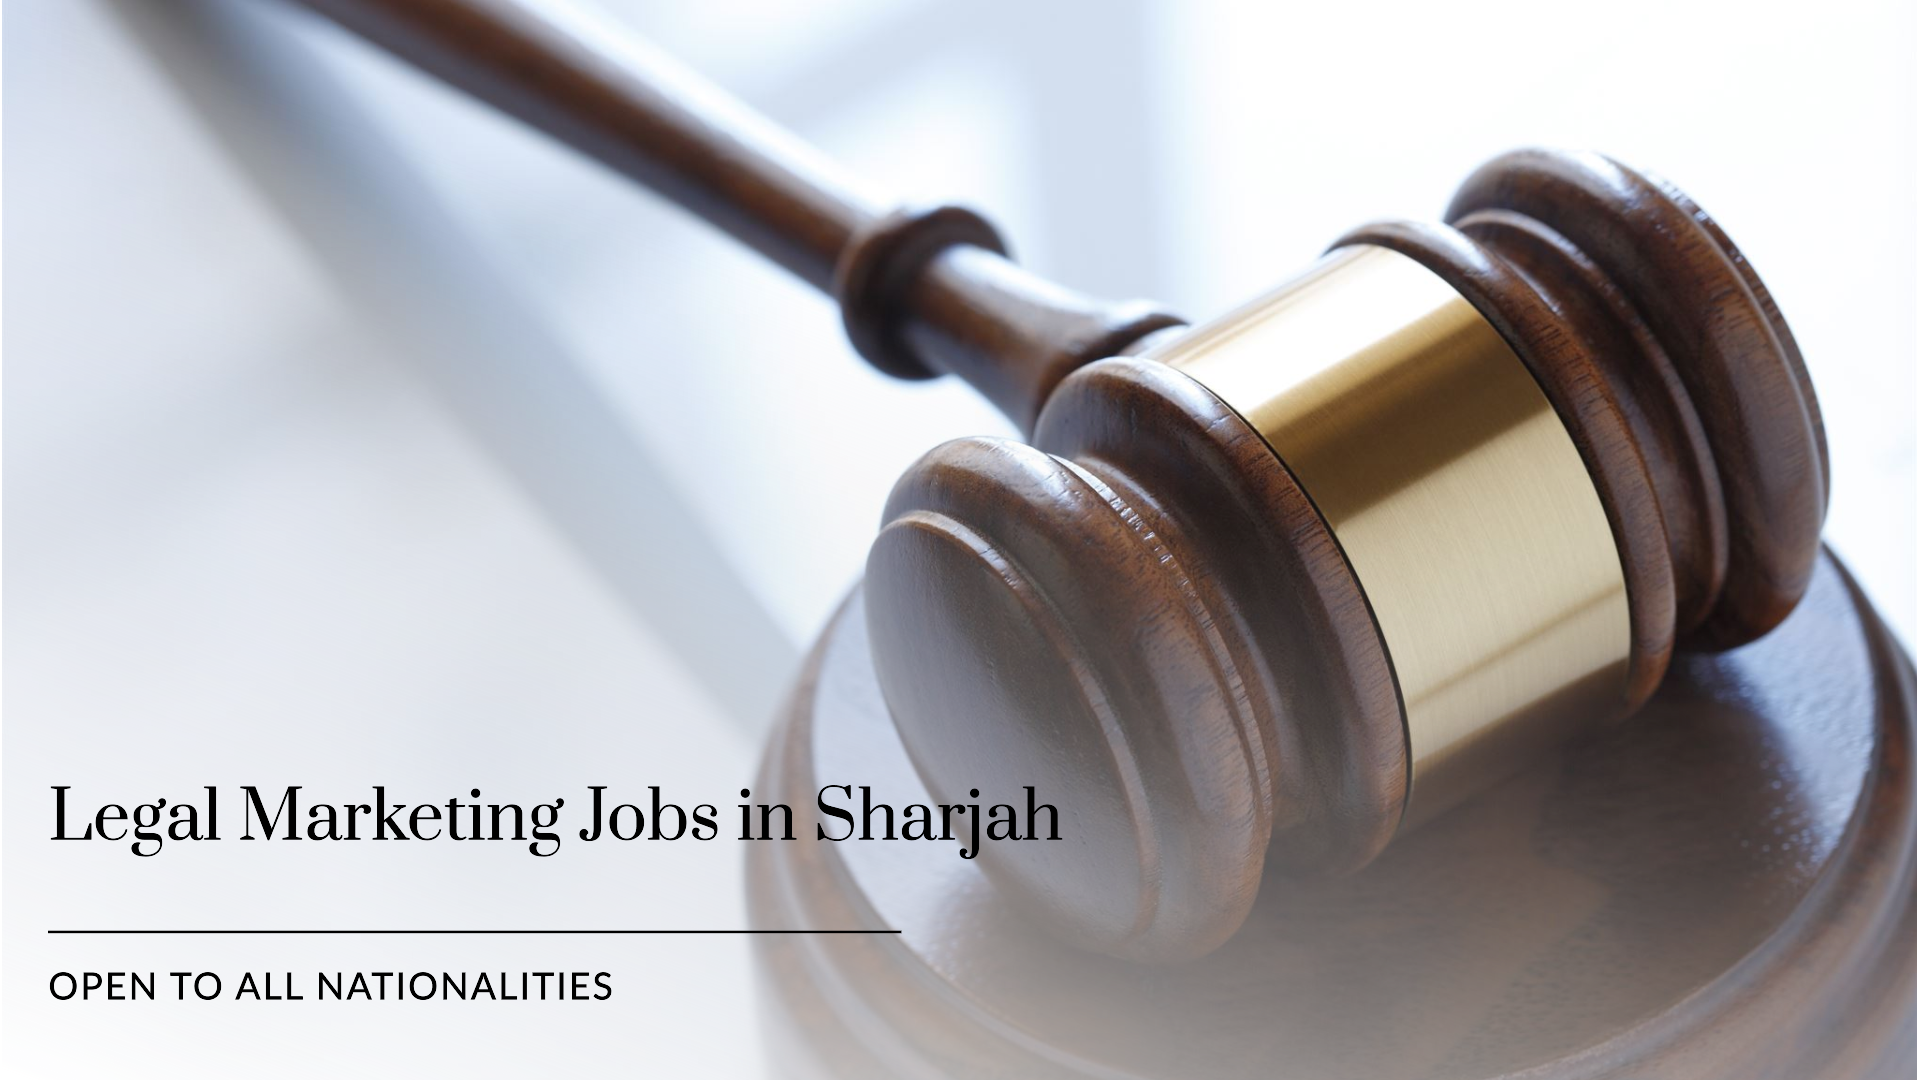 Legal Marketing jobs in Sharjah for all nationalities